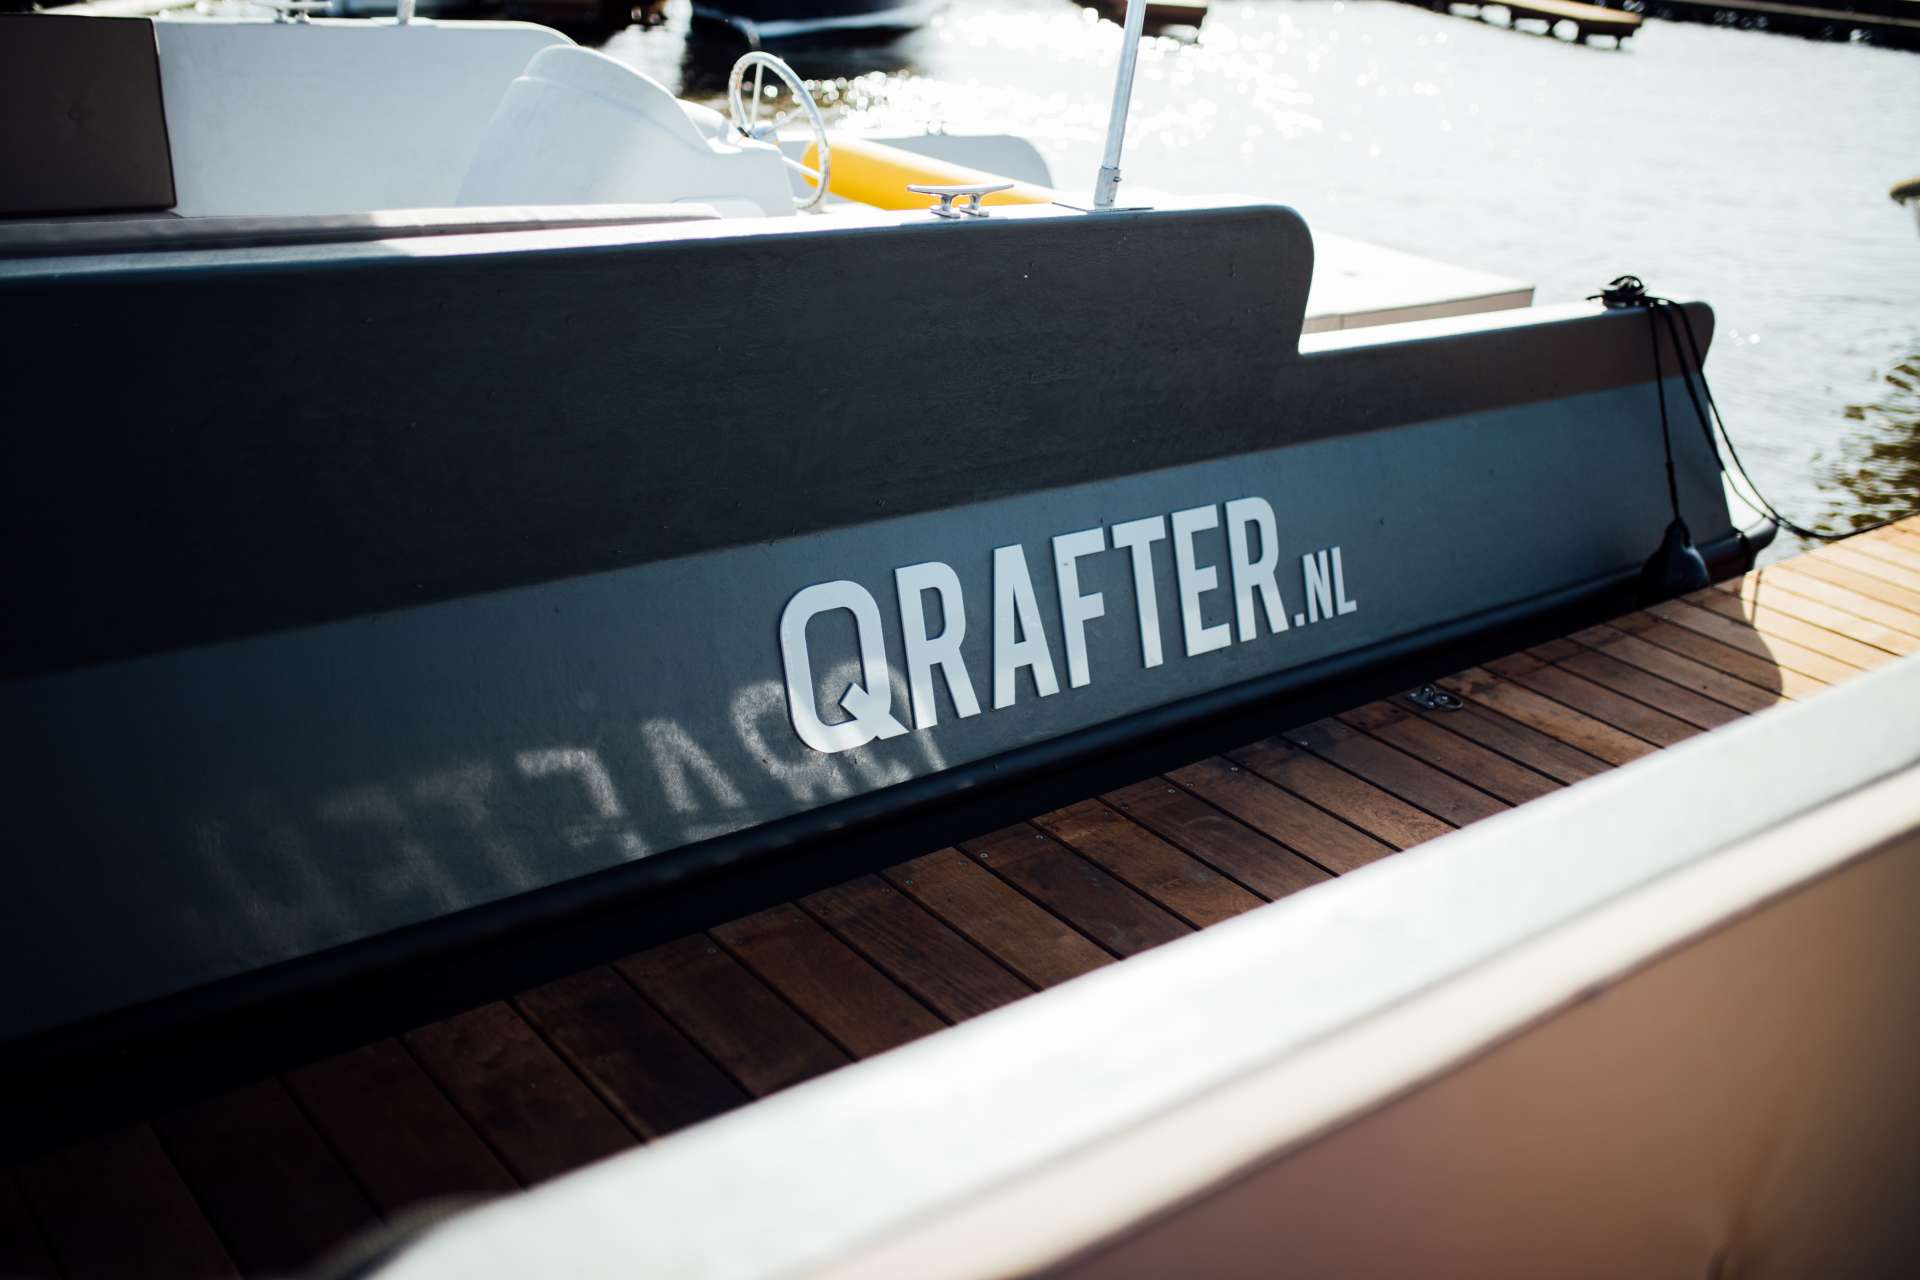 Qrafter e-Lounger 650